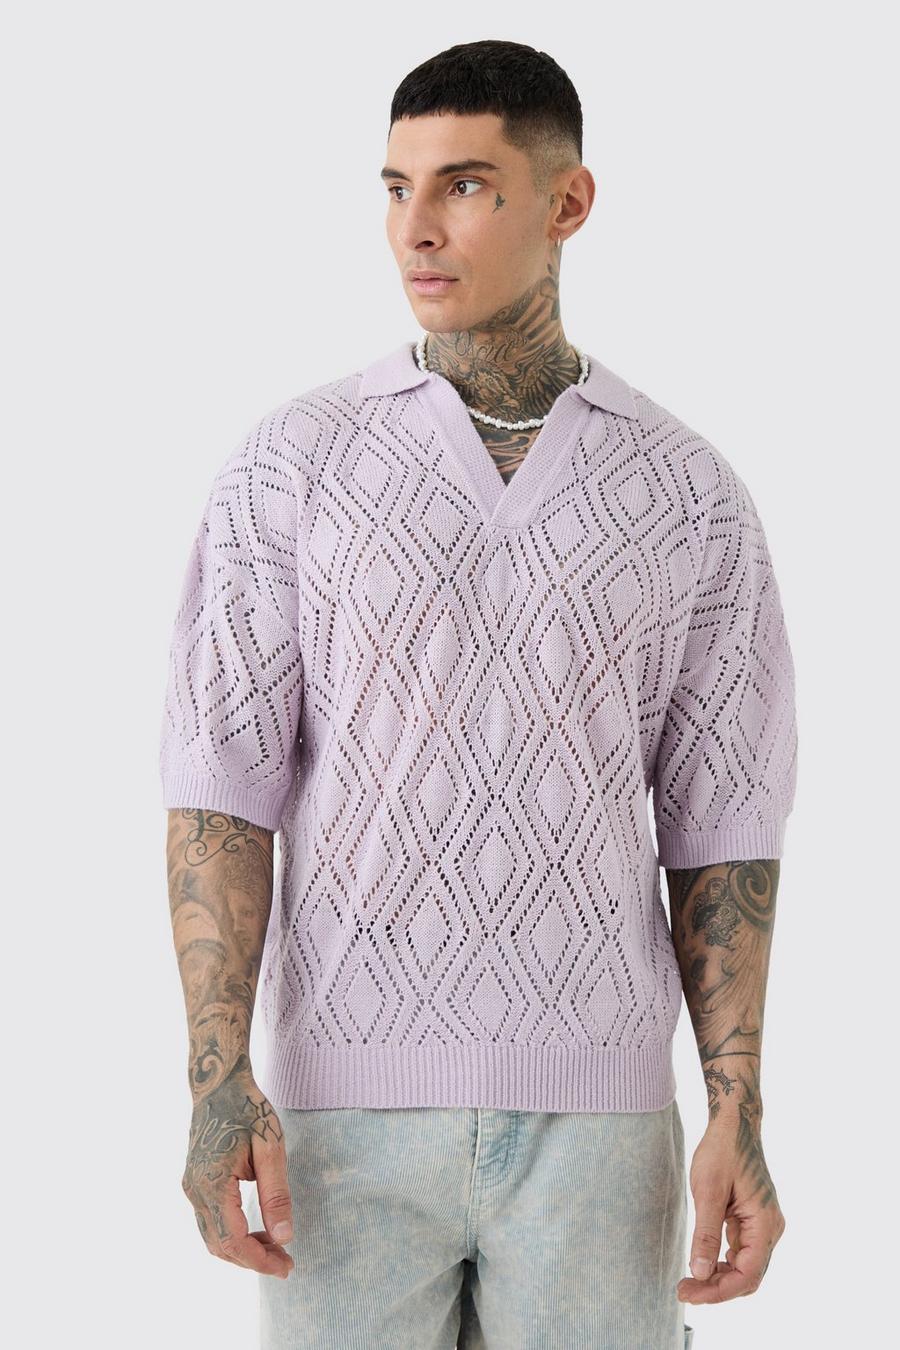 Tall Short Sleeve Boxy Fit Revere Open Knit Polo In Ecru, Lilac